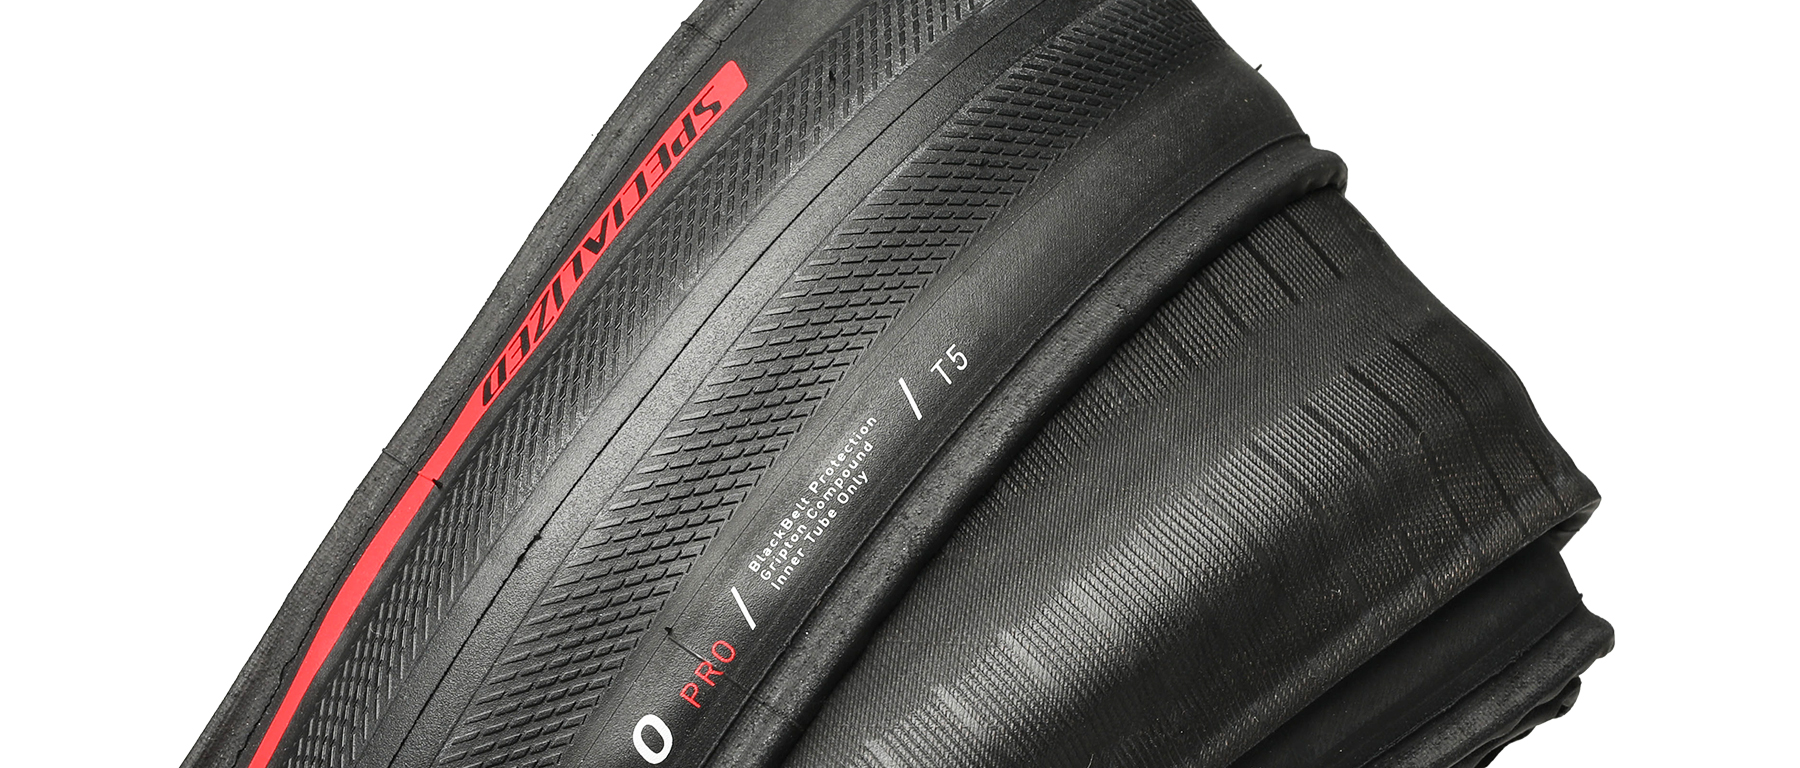 Specialized Turbo Pro T5 Road Tire